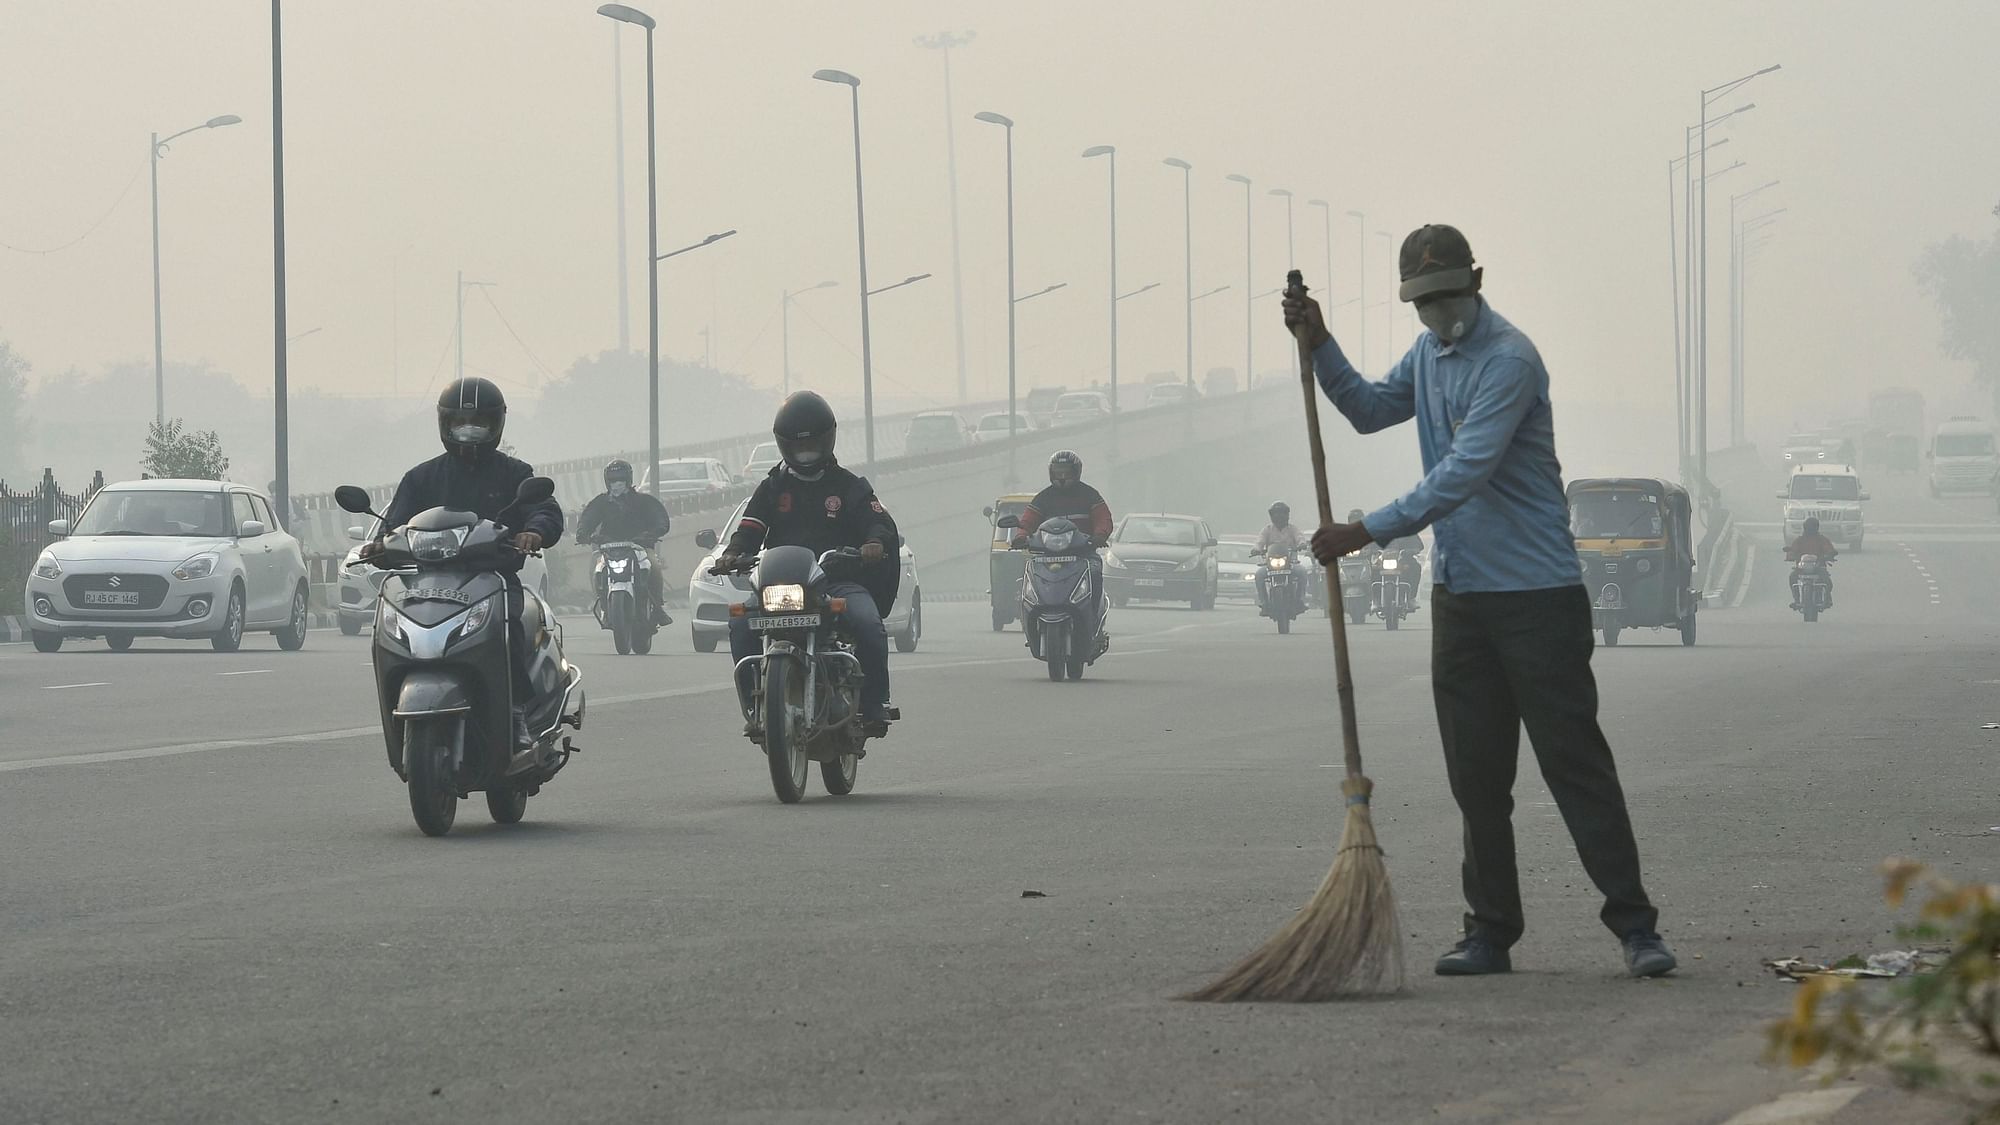  A civic worker, wearing an anti-pollution mask, sweeps the road amid heavy smog, in New Delhi.